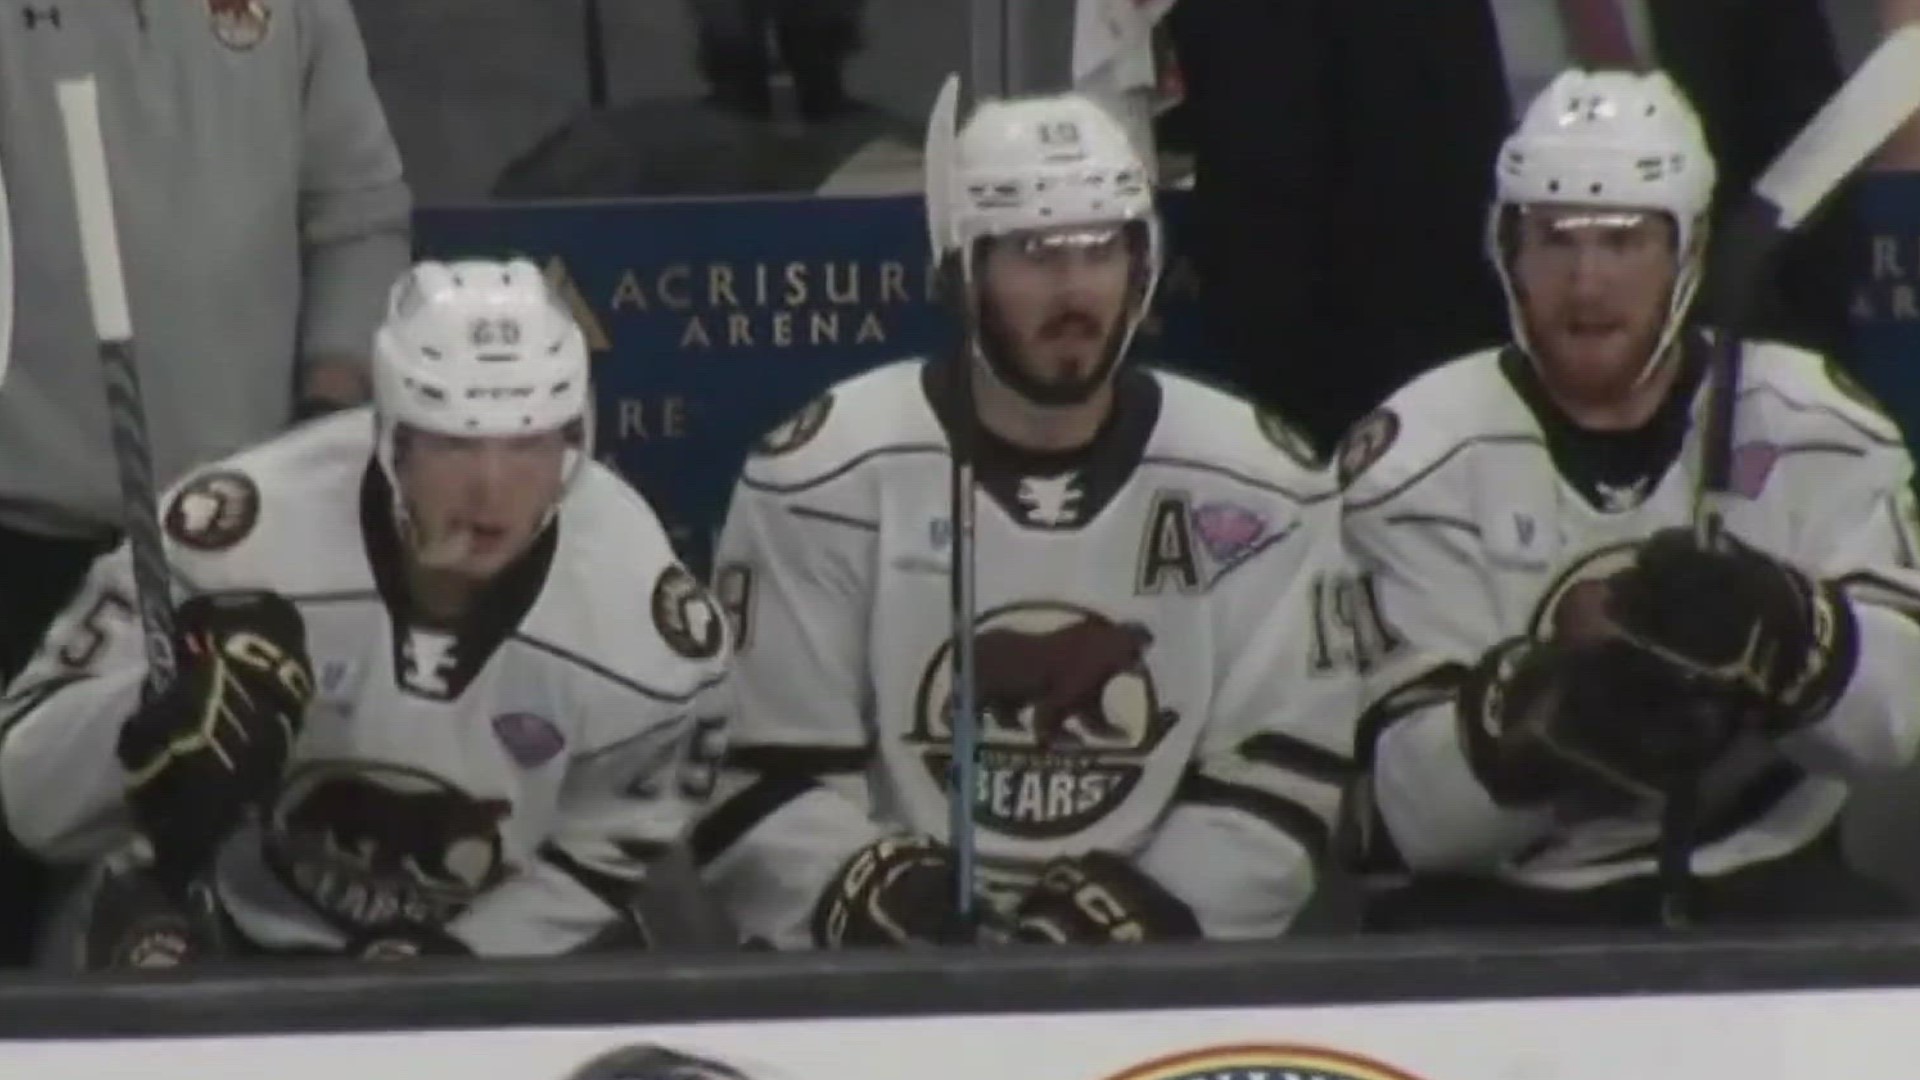 Hershey is in a similar situation they faced in the Eastern Conference Finals against Rochester, before they rebounded with a win in Game Two.